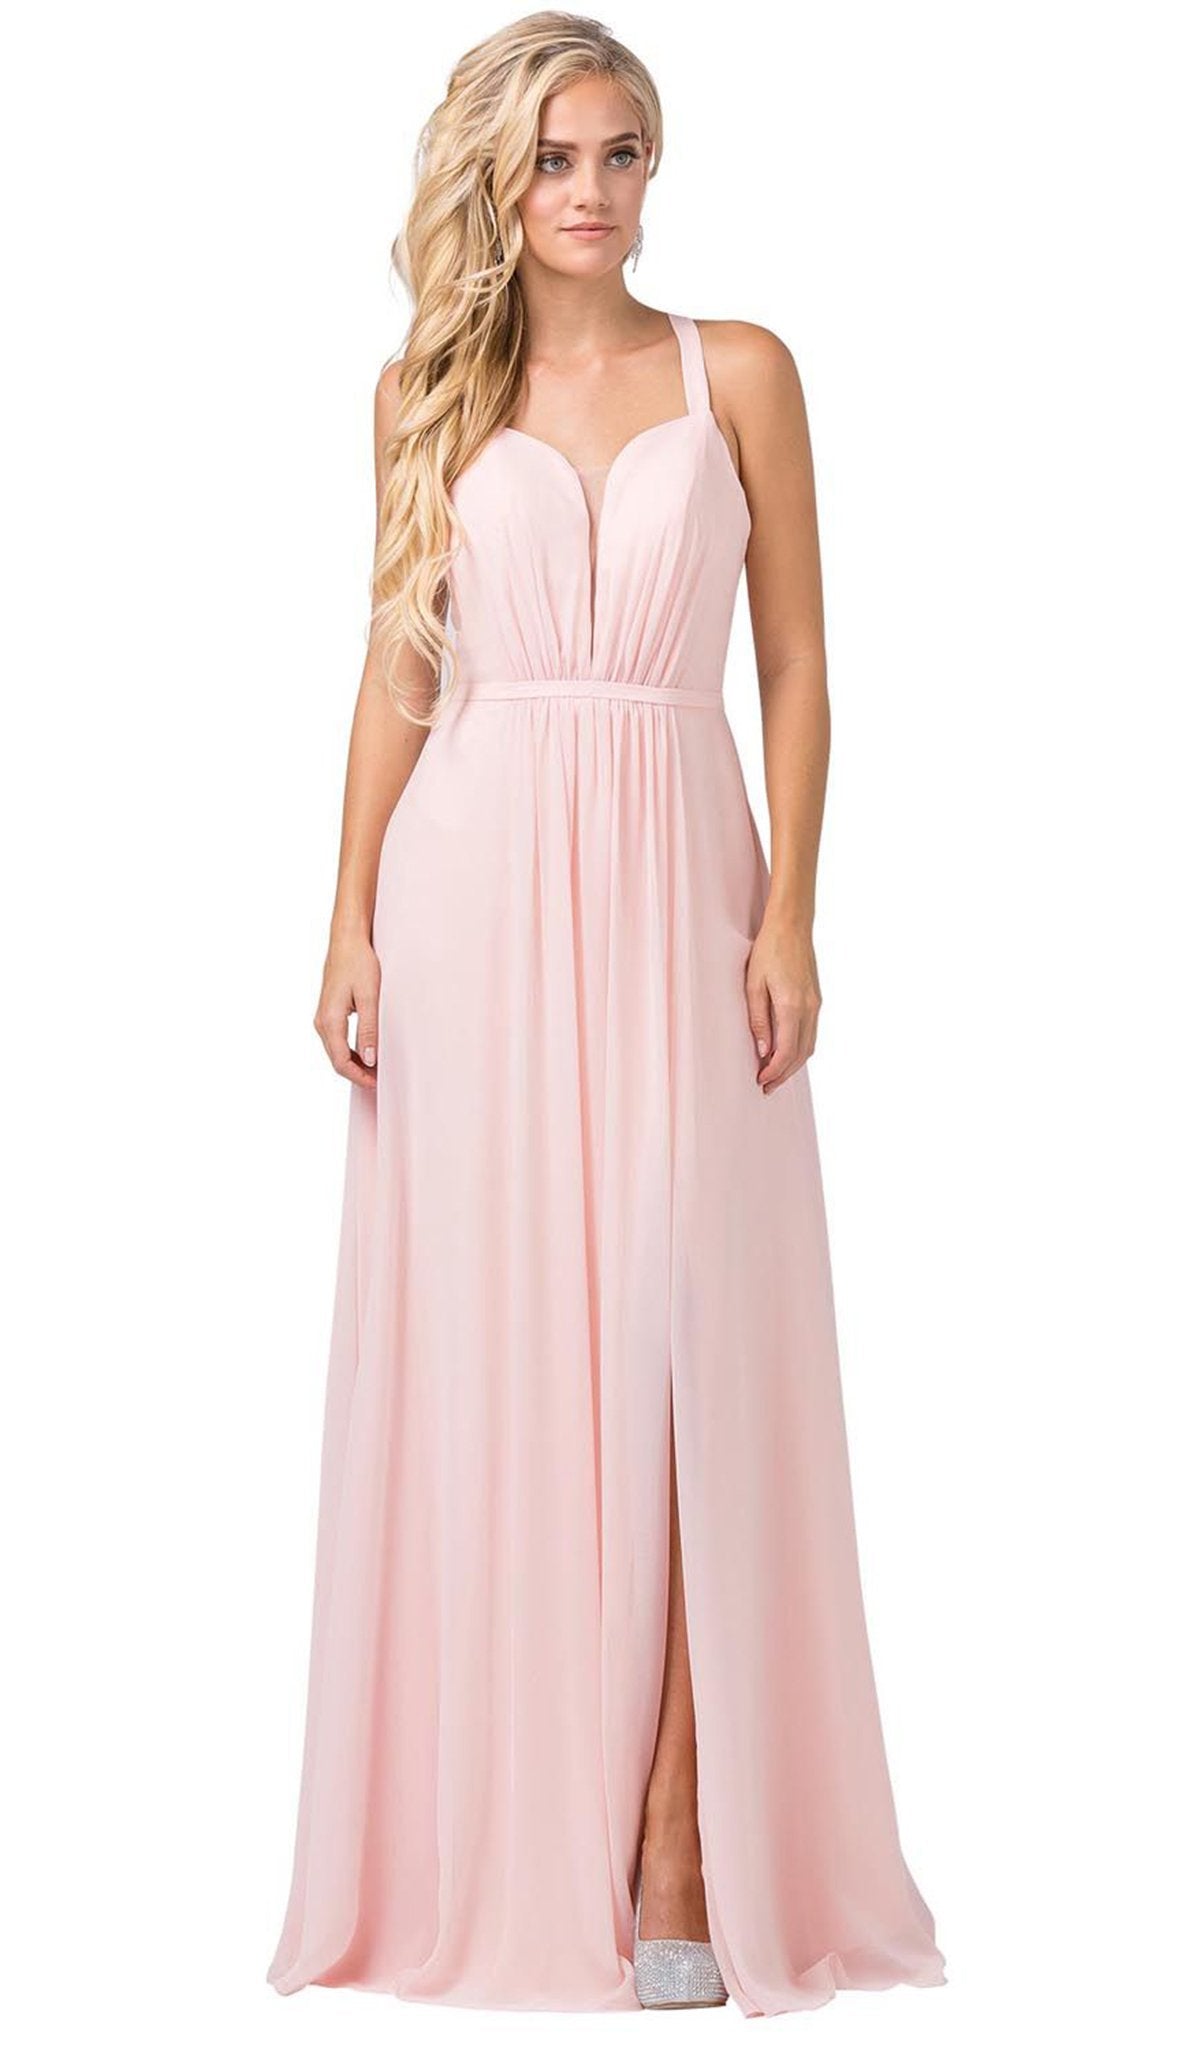 Dancing Queen - 2541 Crisscross Strap Ruched Bodice Chiffon Dress In Pink